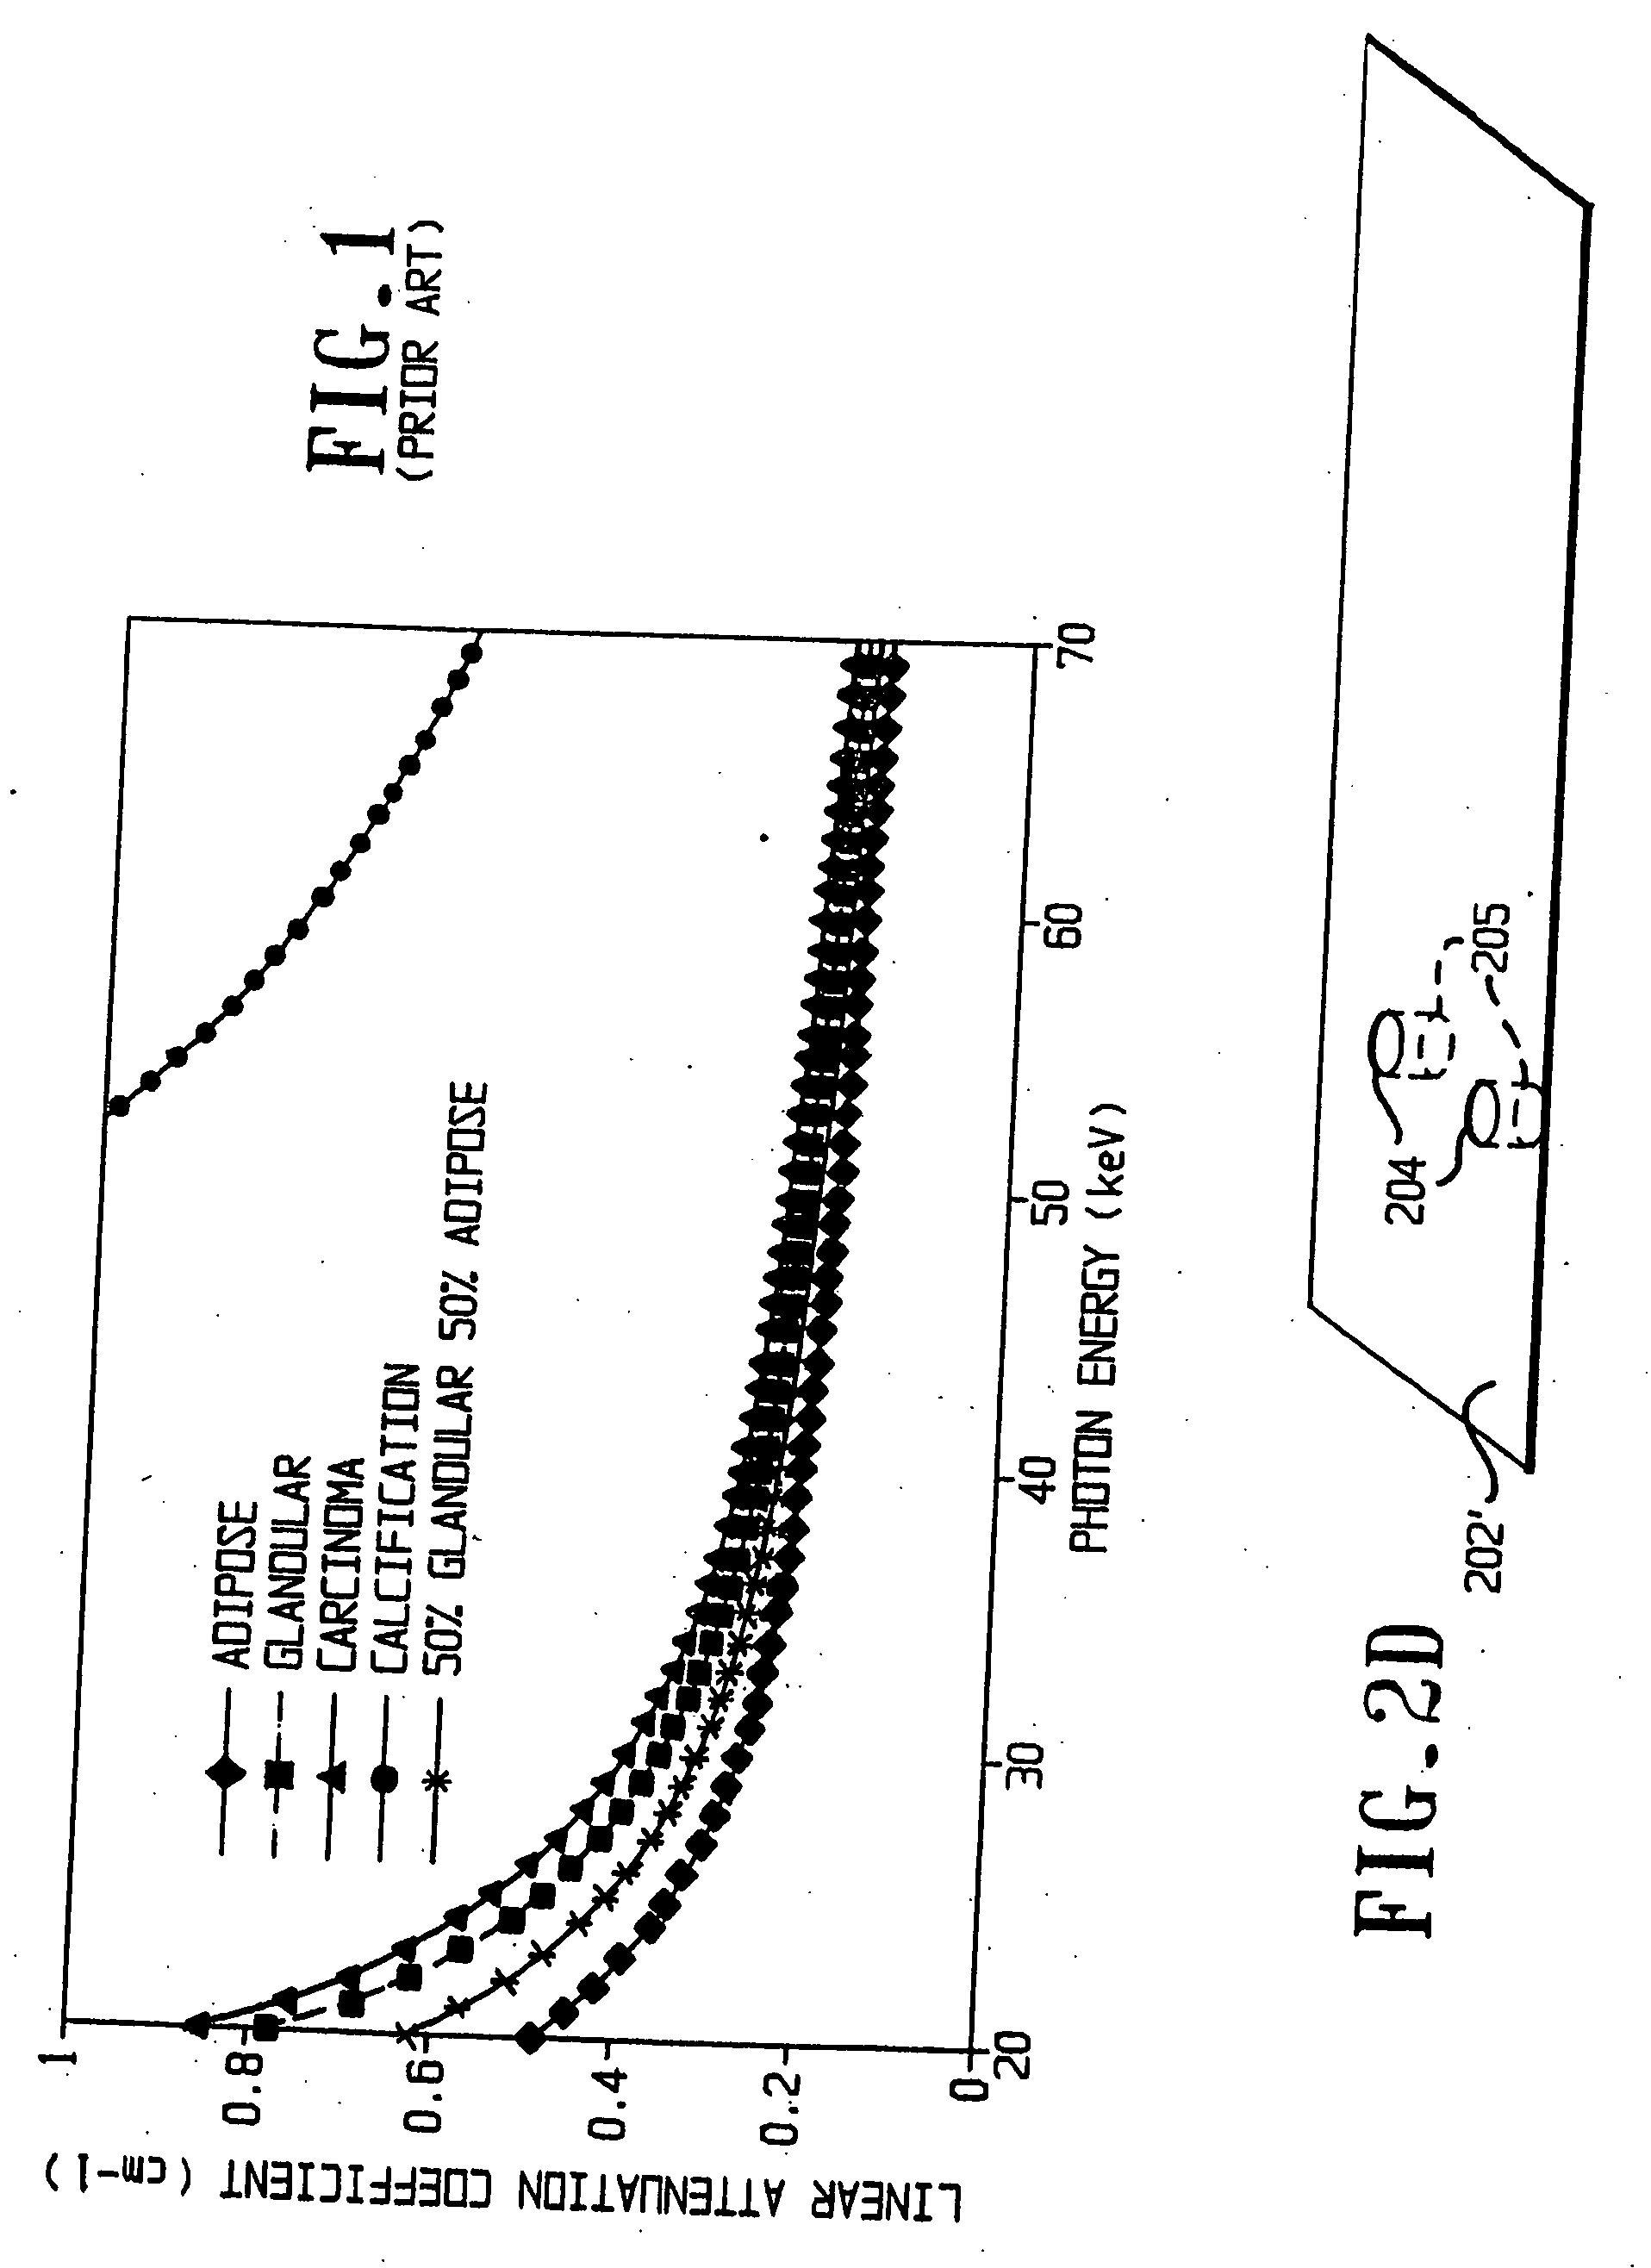 Apparatus and method for cone beam computed tomography breast imaging